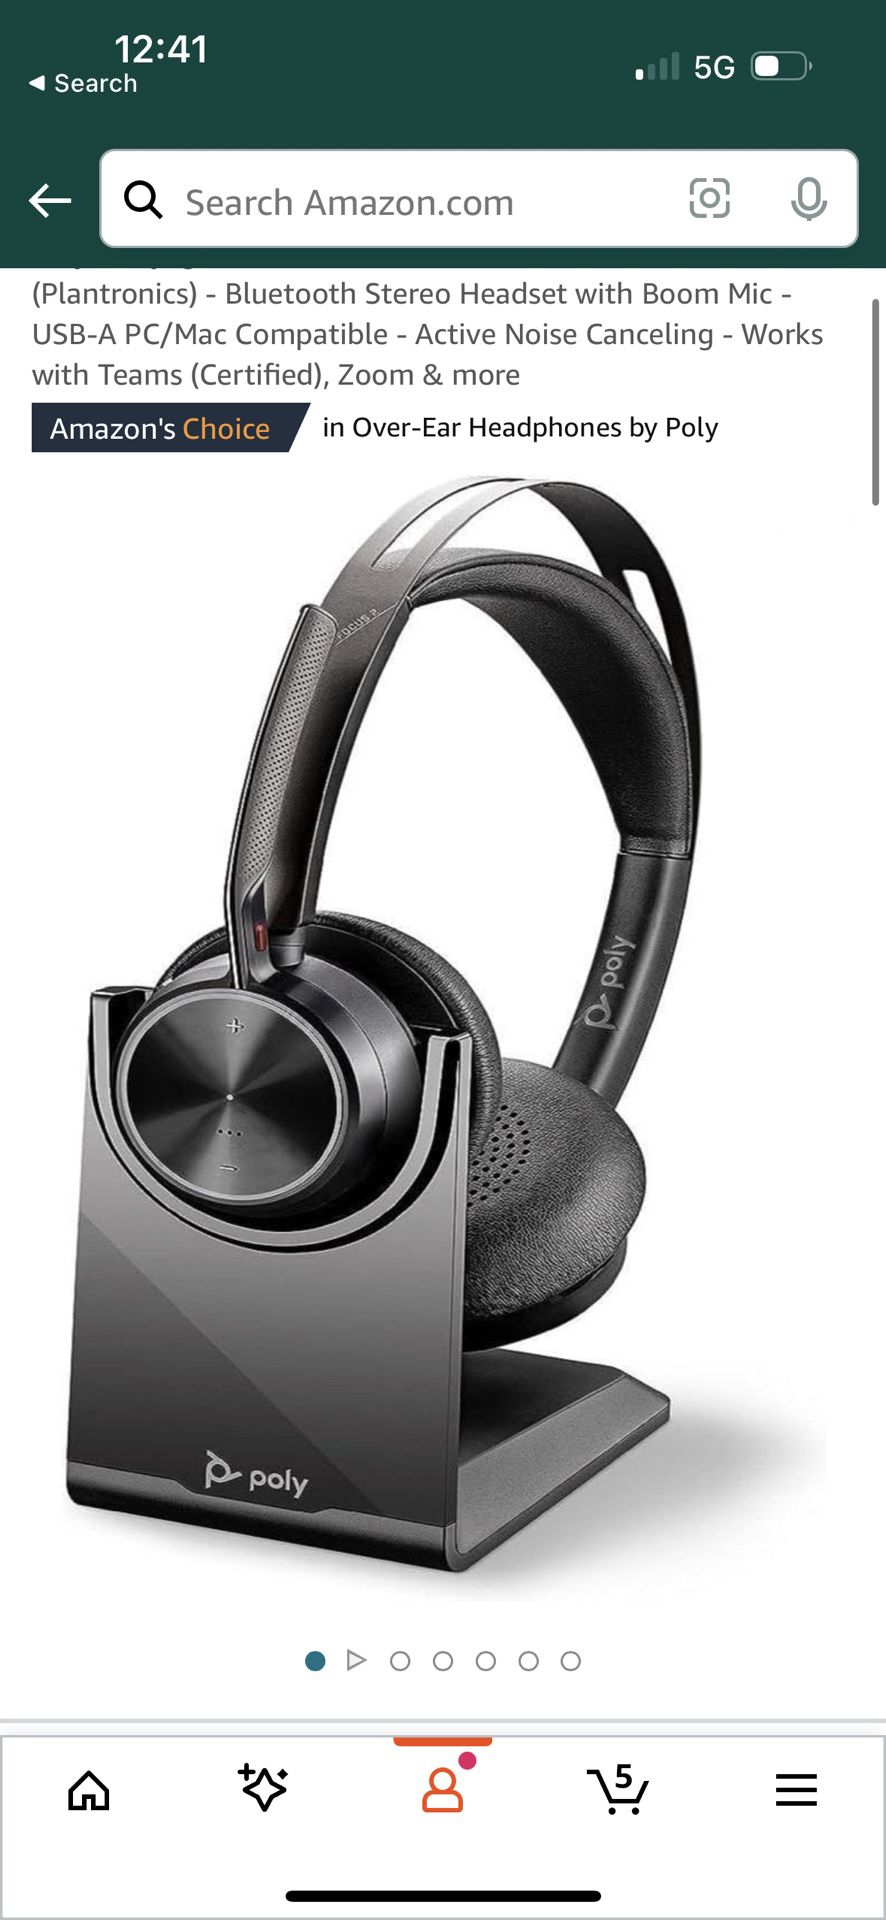 New Poly - Voyager Focus 2 UC USB-A Headset with Stand (Plantronics) - Bluetooth Stereo Headset with Boom Mic - USB-A PC/Mac Compatible - Active 